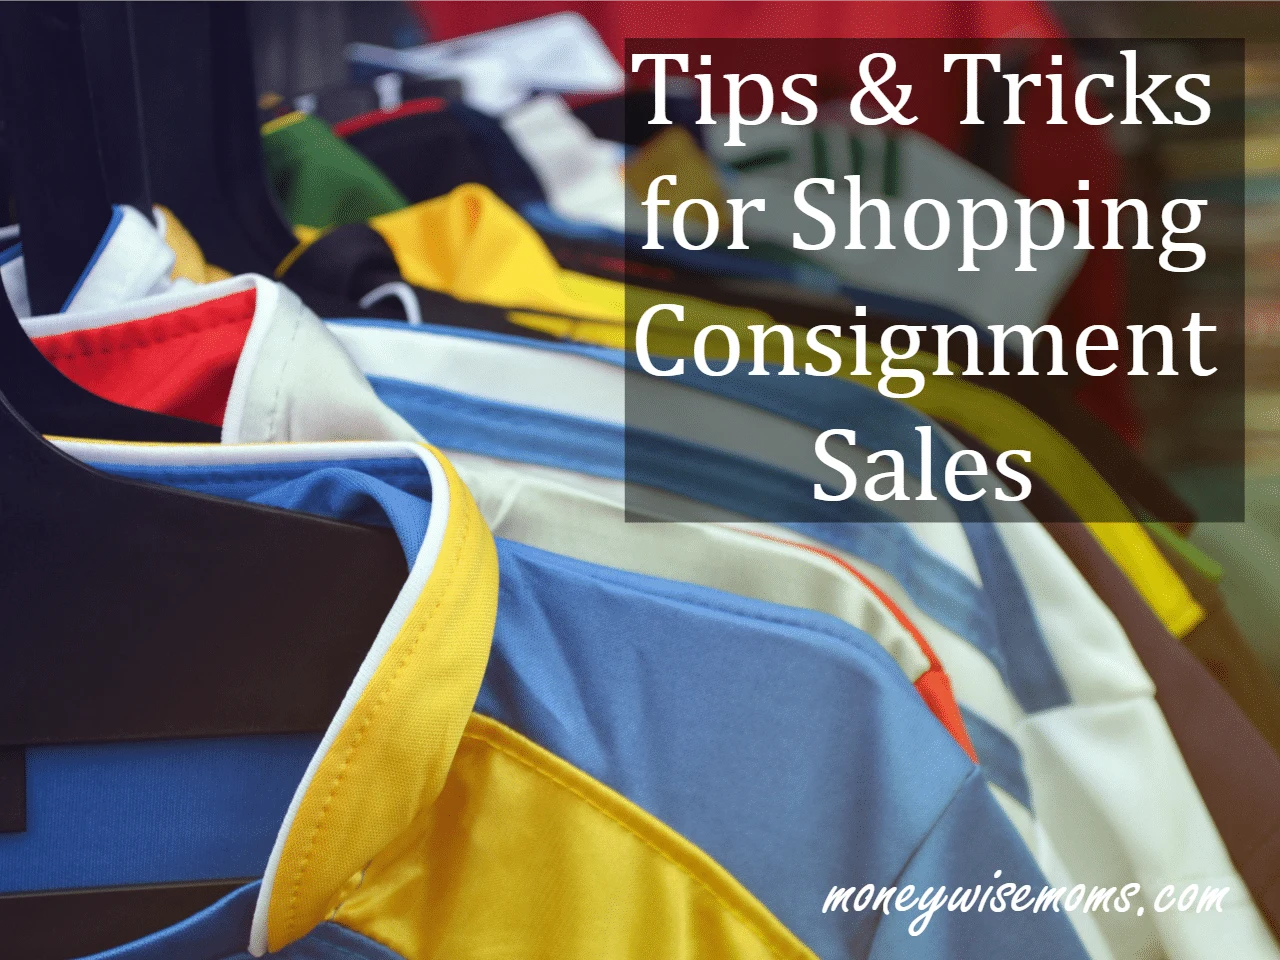 How to Shop Kids Consignment Sales - tips and tricks from a mom of twins